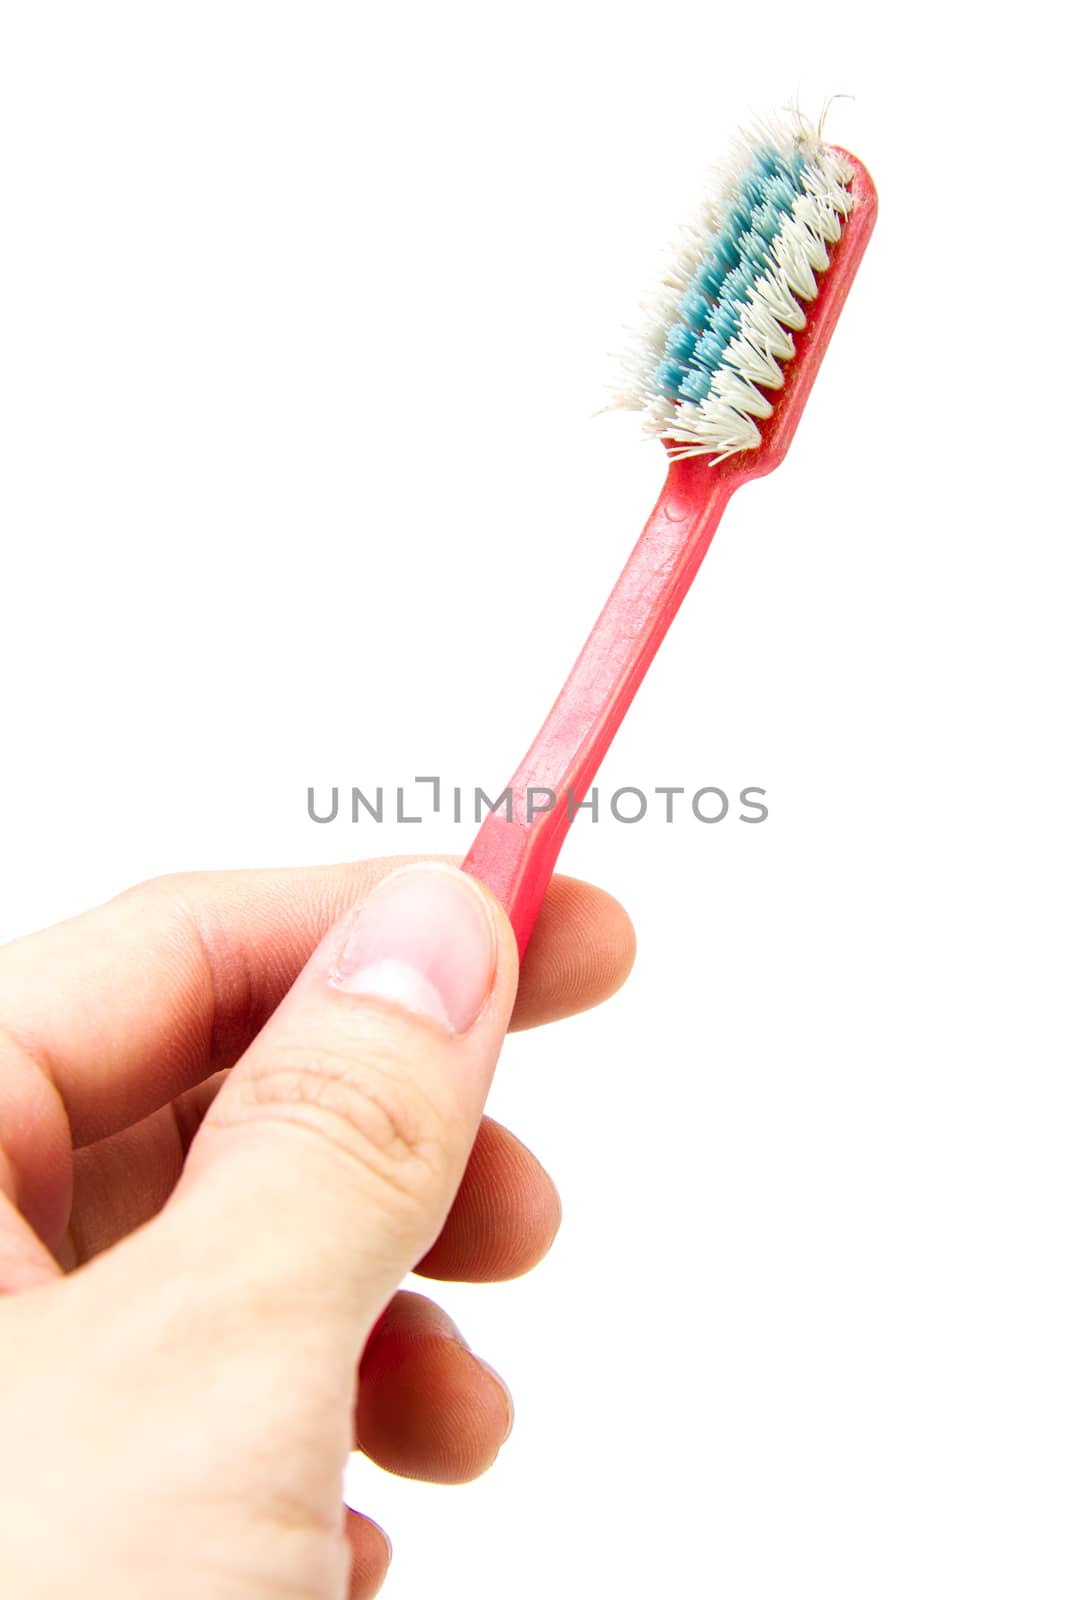 old toothbrush in hand isolated on white background